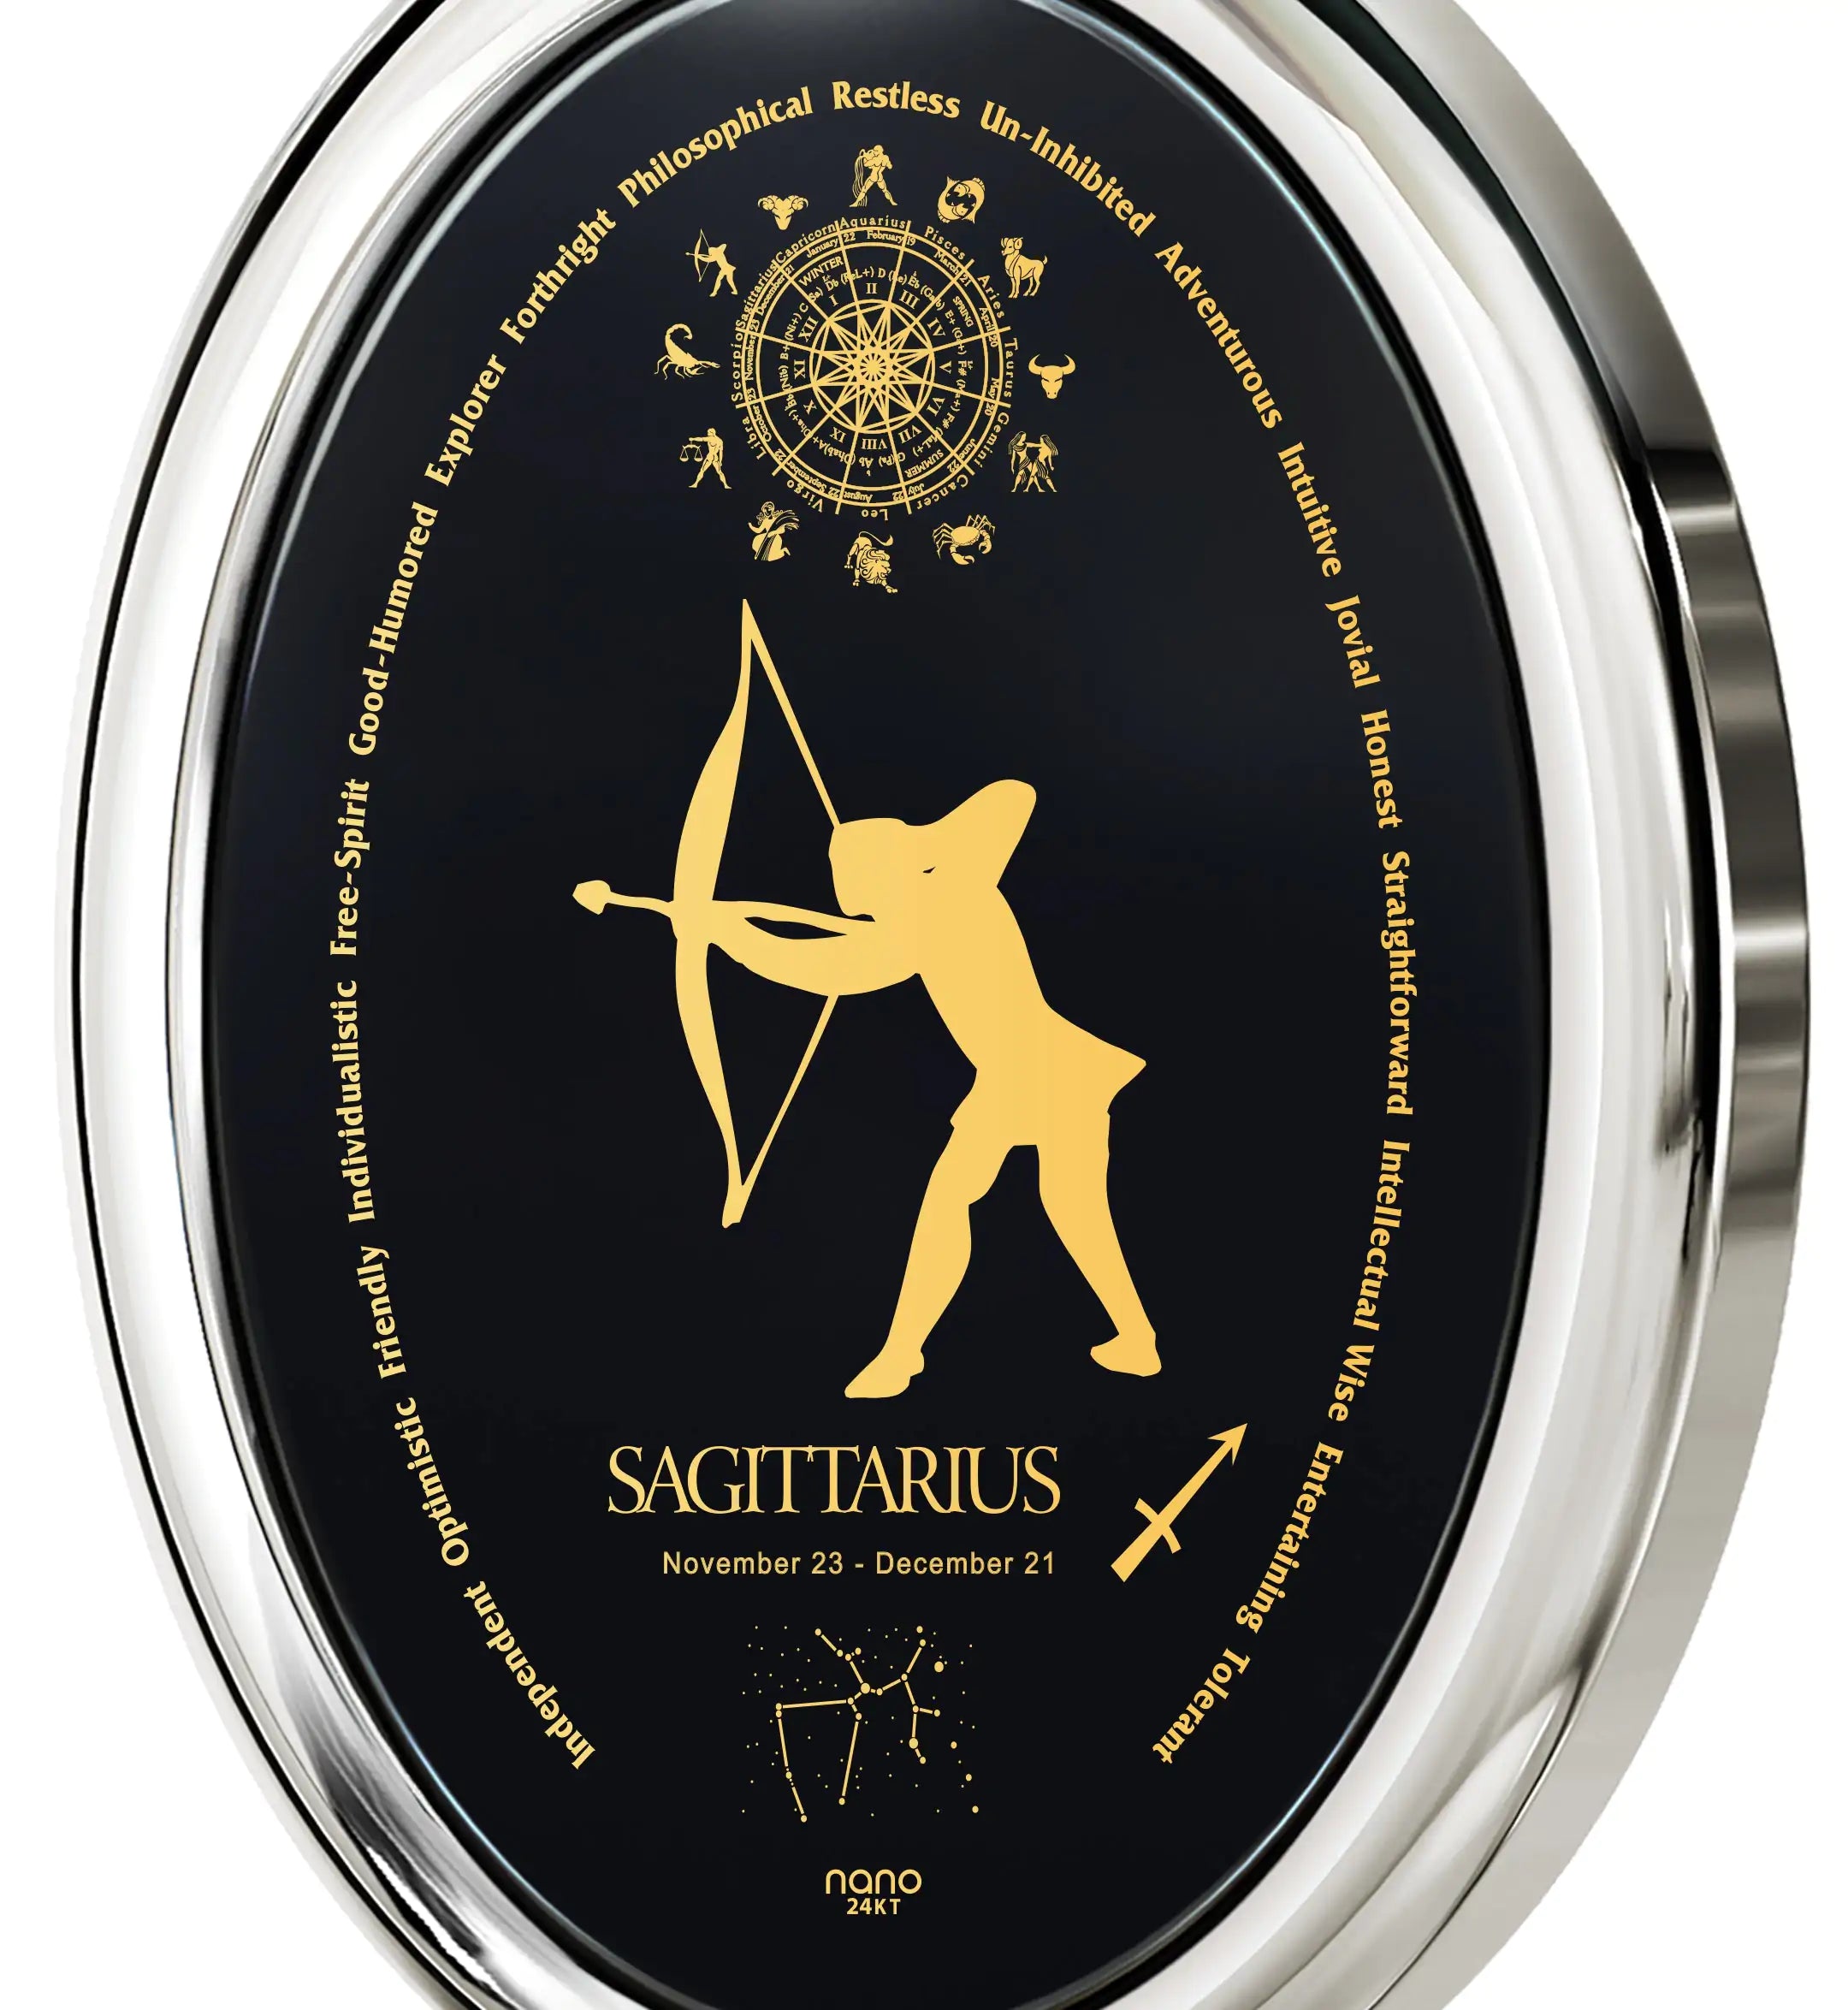 Gold and black Sagittarius Zodiac Necklace with astrology symbols and dates.